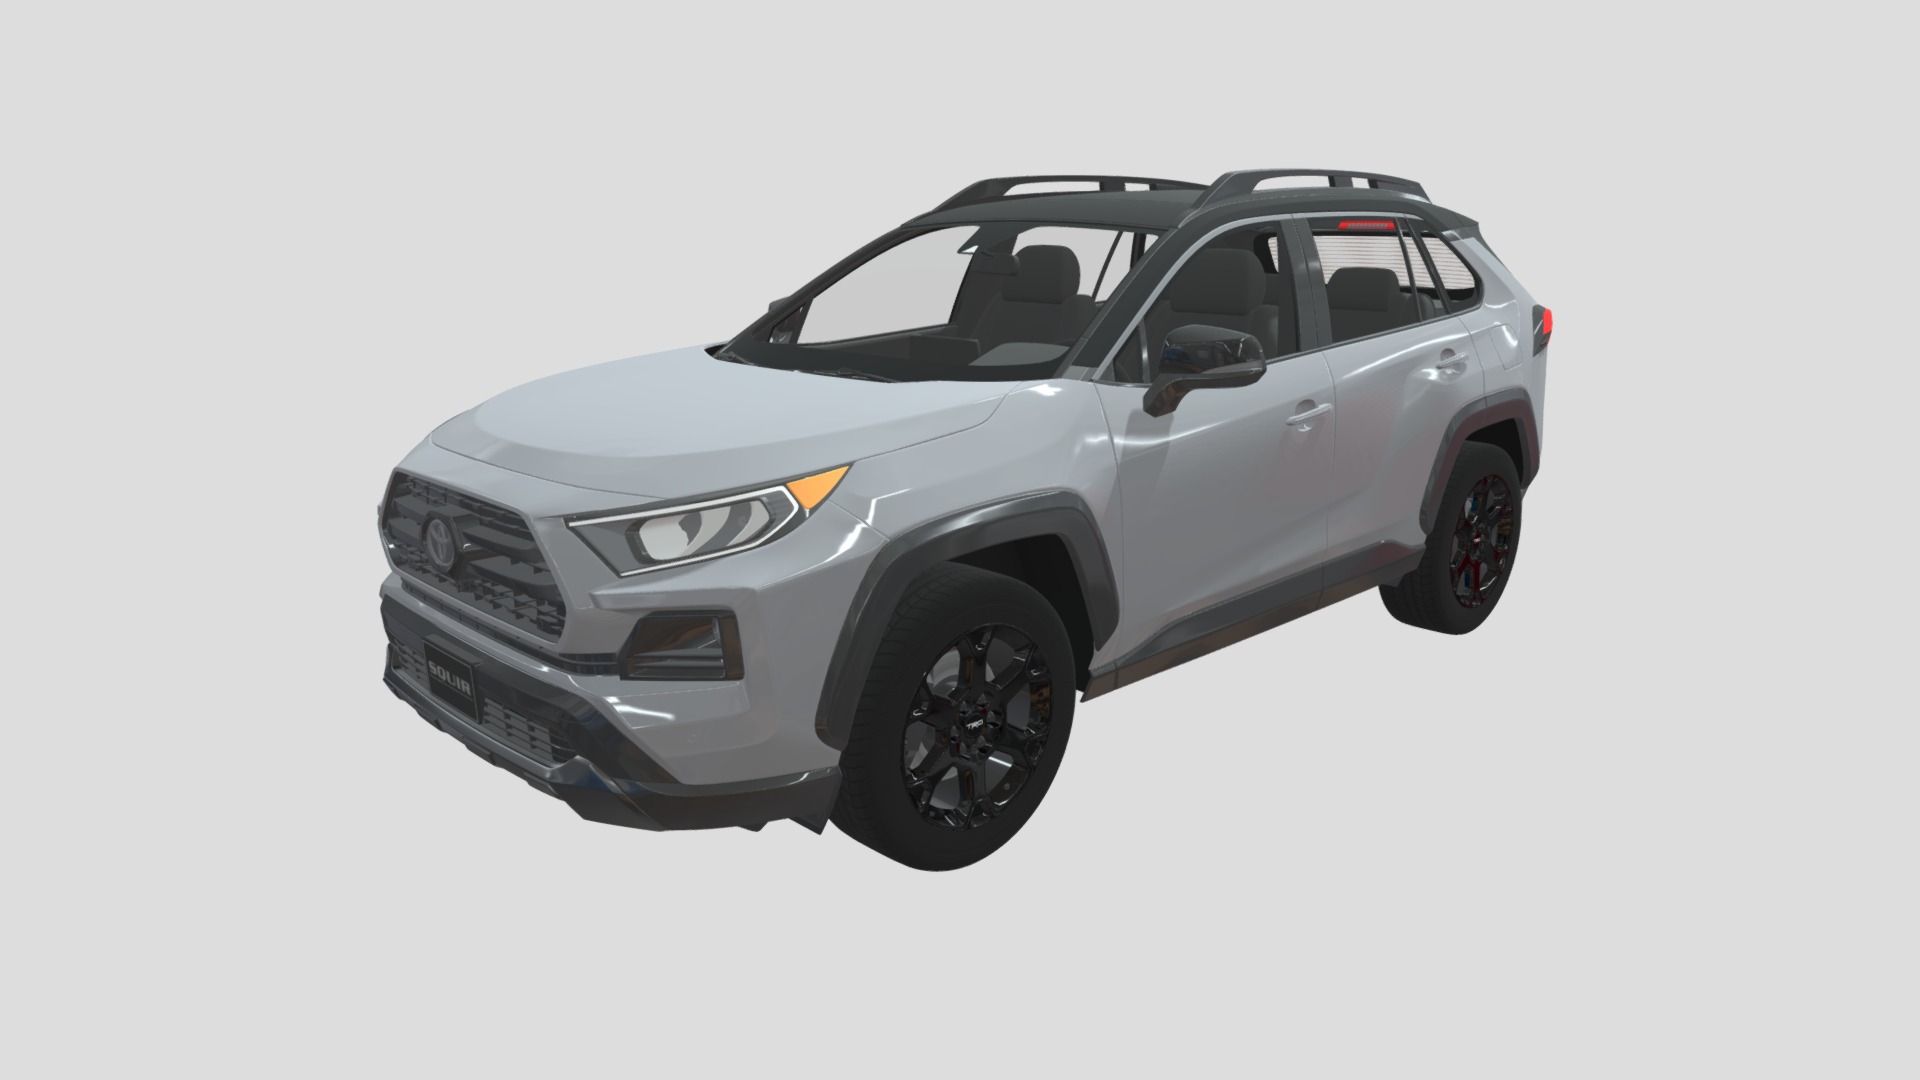 3D model Toyota RAV4 TRD 2020 - This is a 3D model of the Toyota RAV4 TRD 2020. The 3D model is about a white car with a black rim.